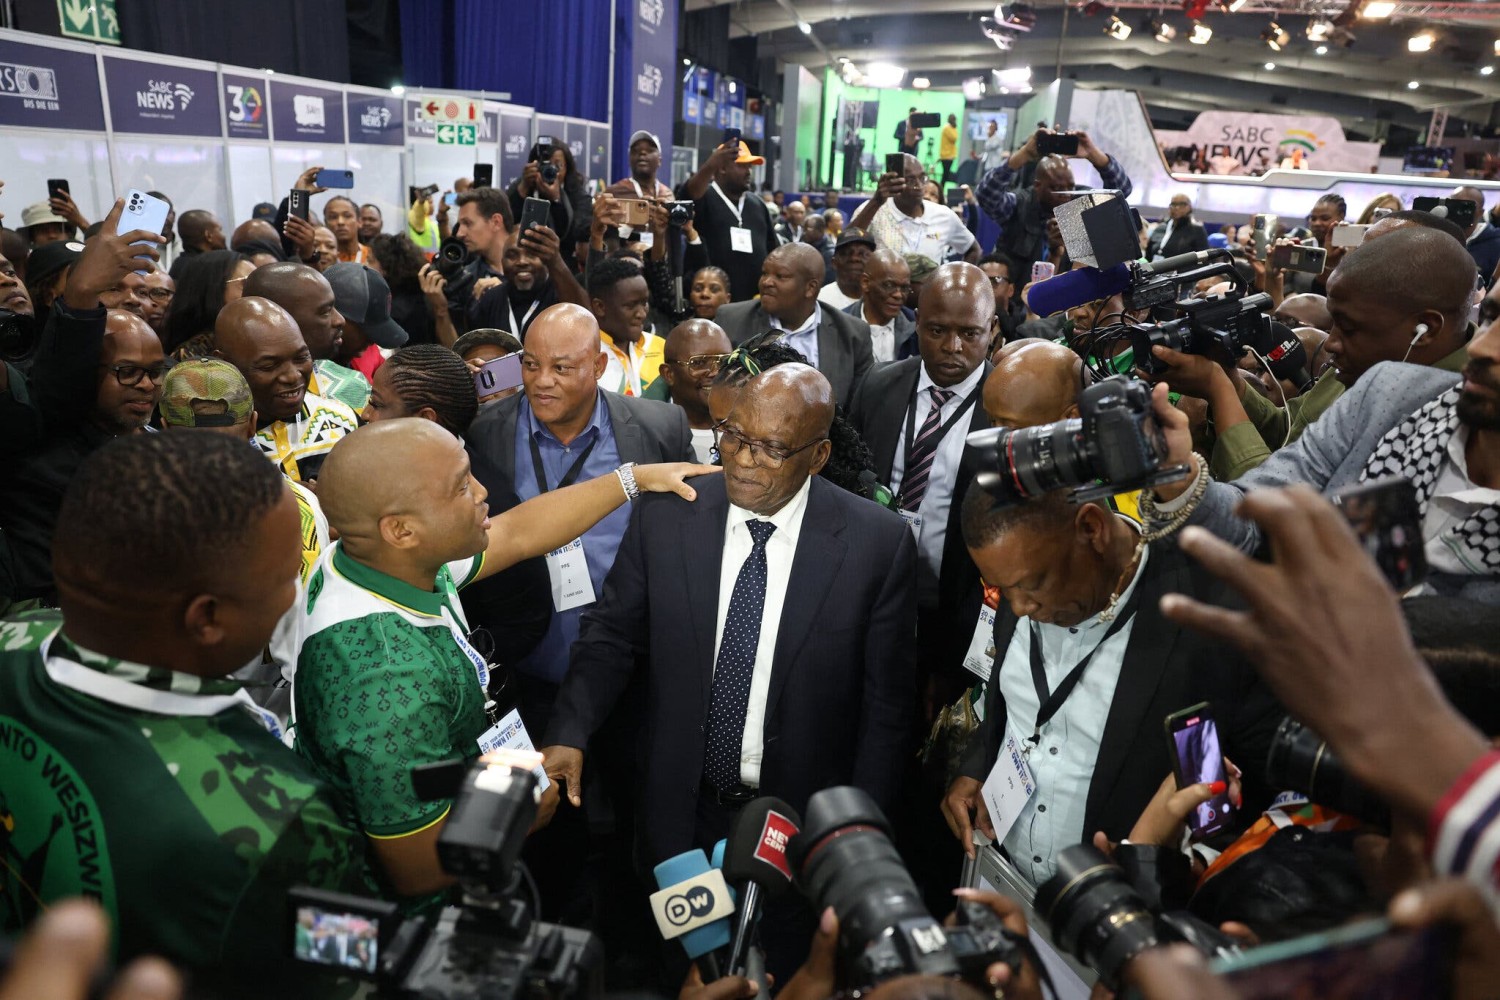 Jacob Zuma Gets Revenge on South African Party That Shunned Him